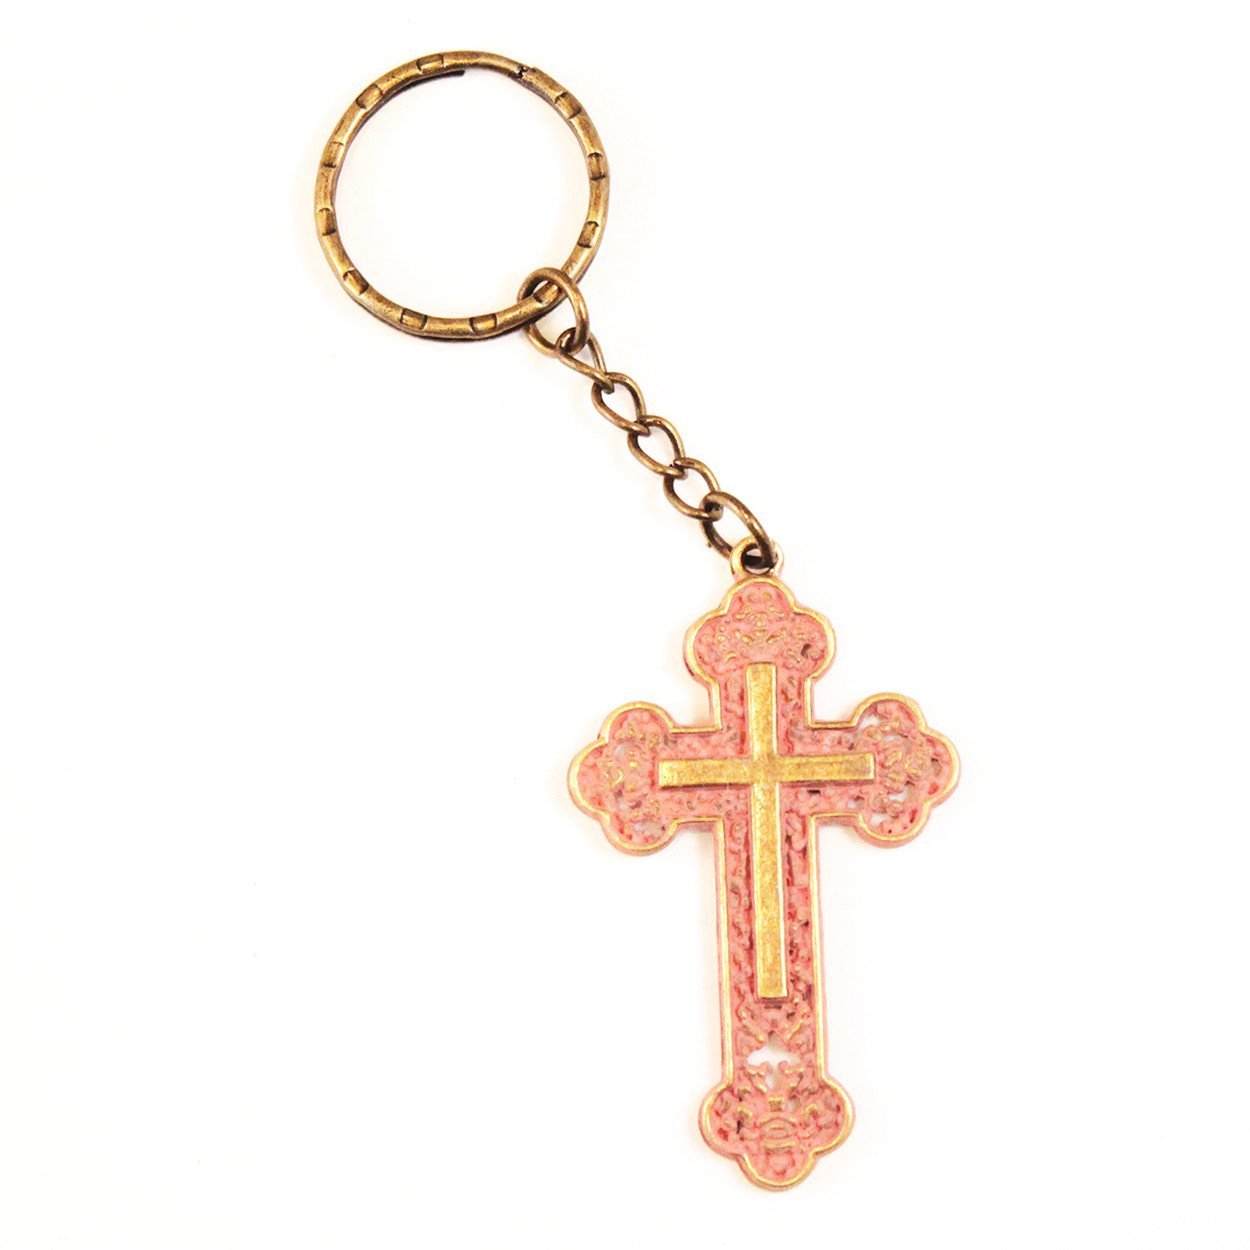 Hand-Painted Cross Keychain: Carry Your Faith Everywhere! - Jewelry & Watches - Bijou Her -  -  - 